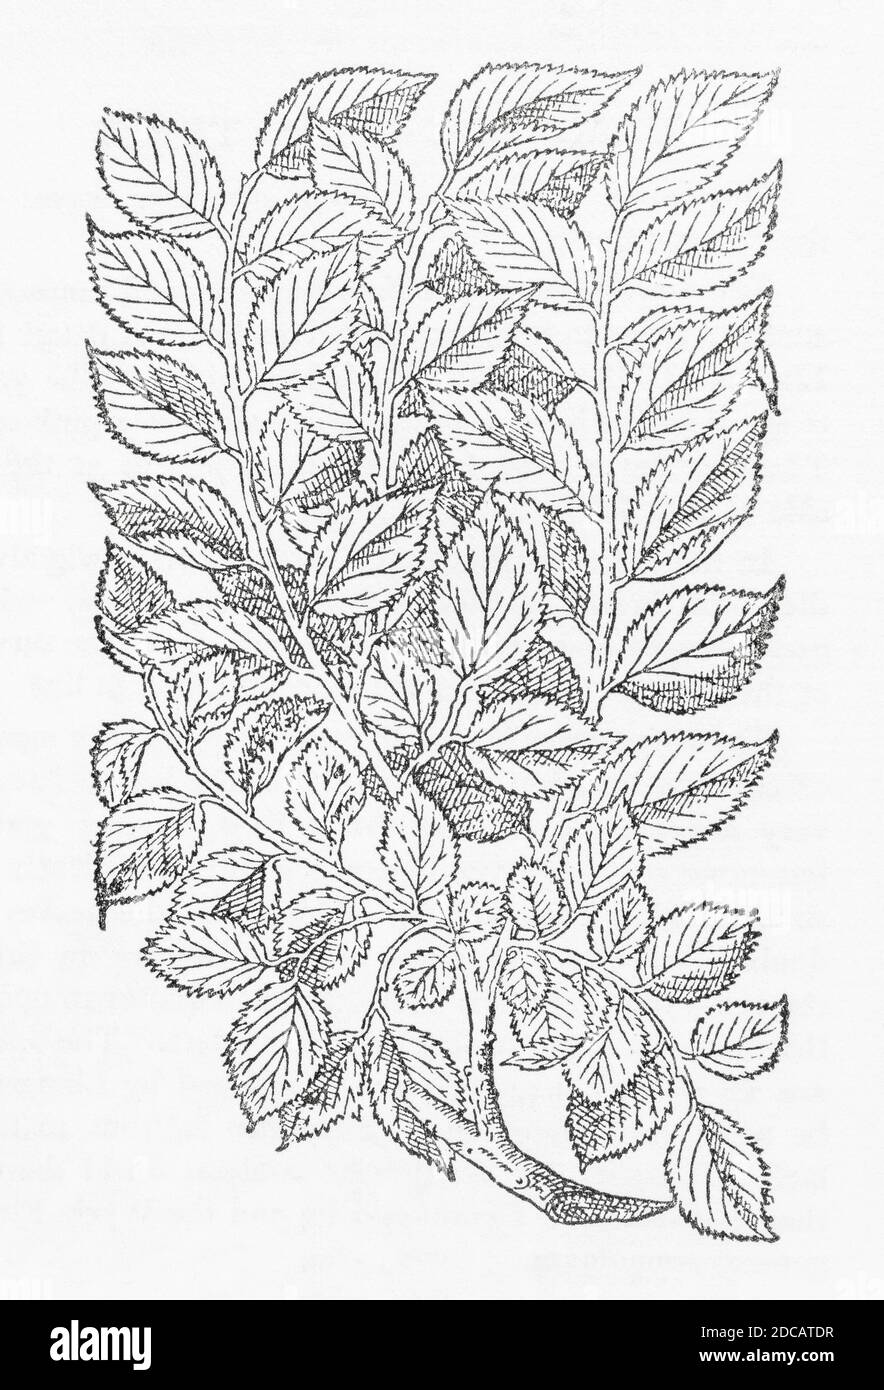 Elm / Ulmus glabra woodcut from Gerarde's Herball, History of Plants. He refers to it as 'The Elme with broad leaves' / Ulmus latifolia. P1297 Stock Photo